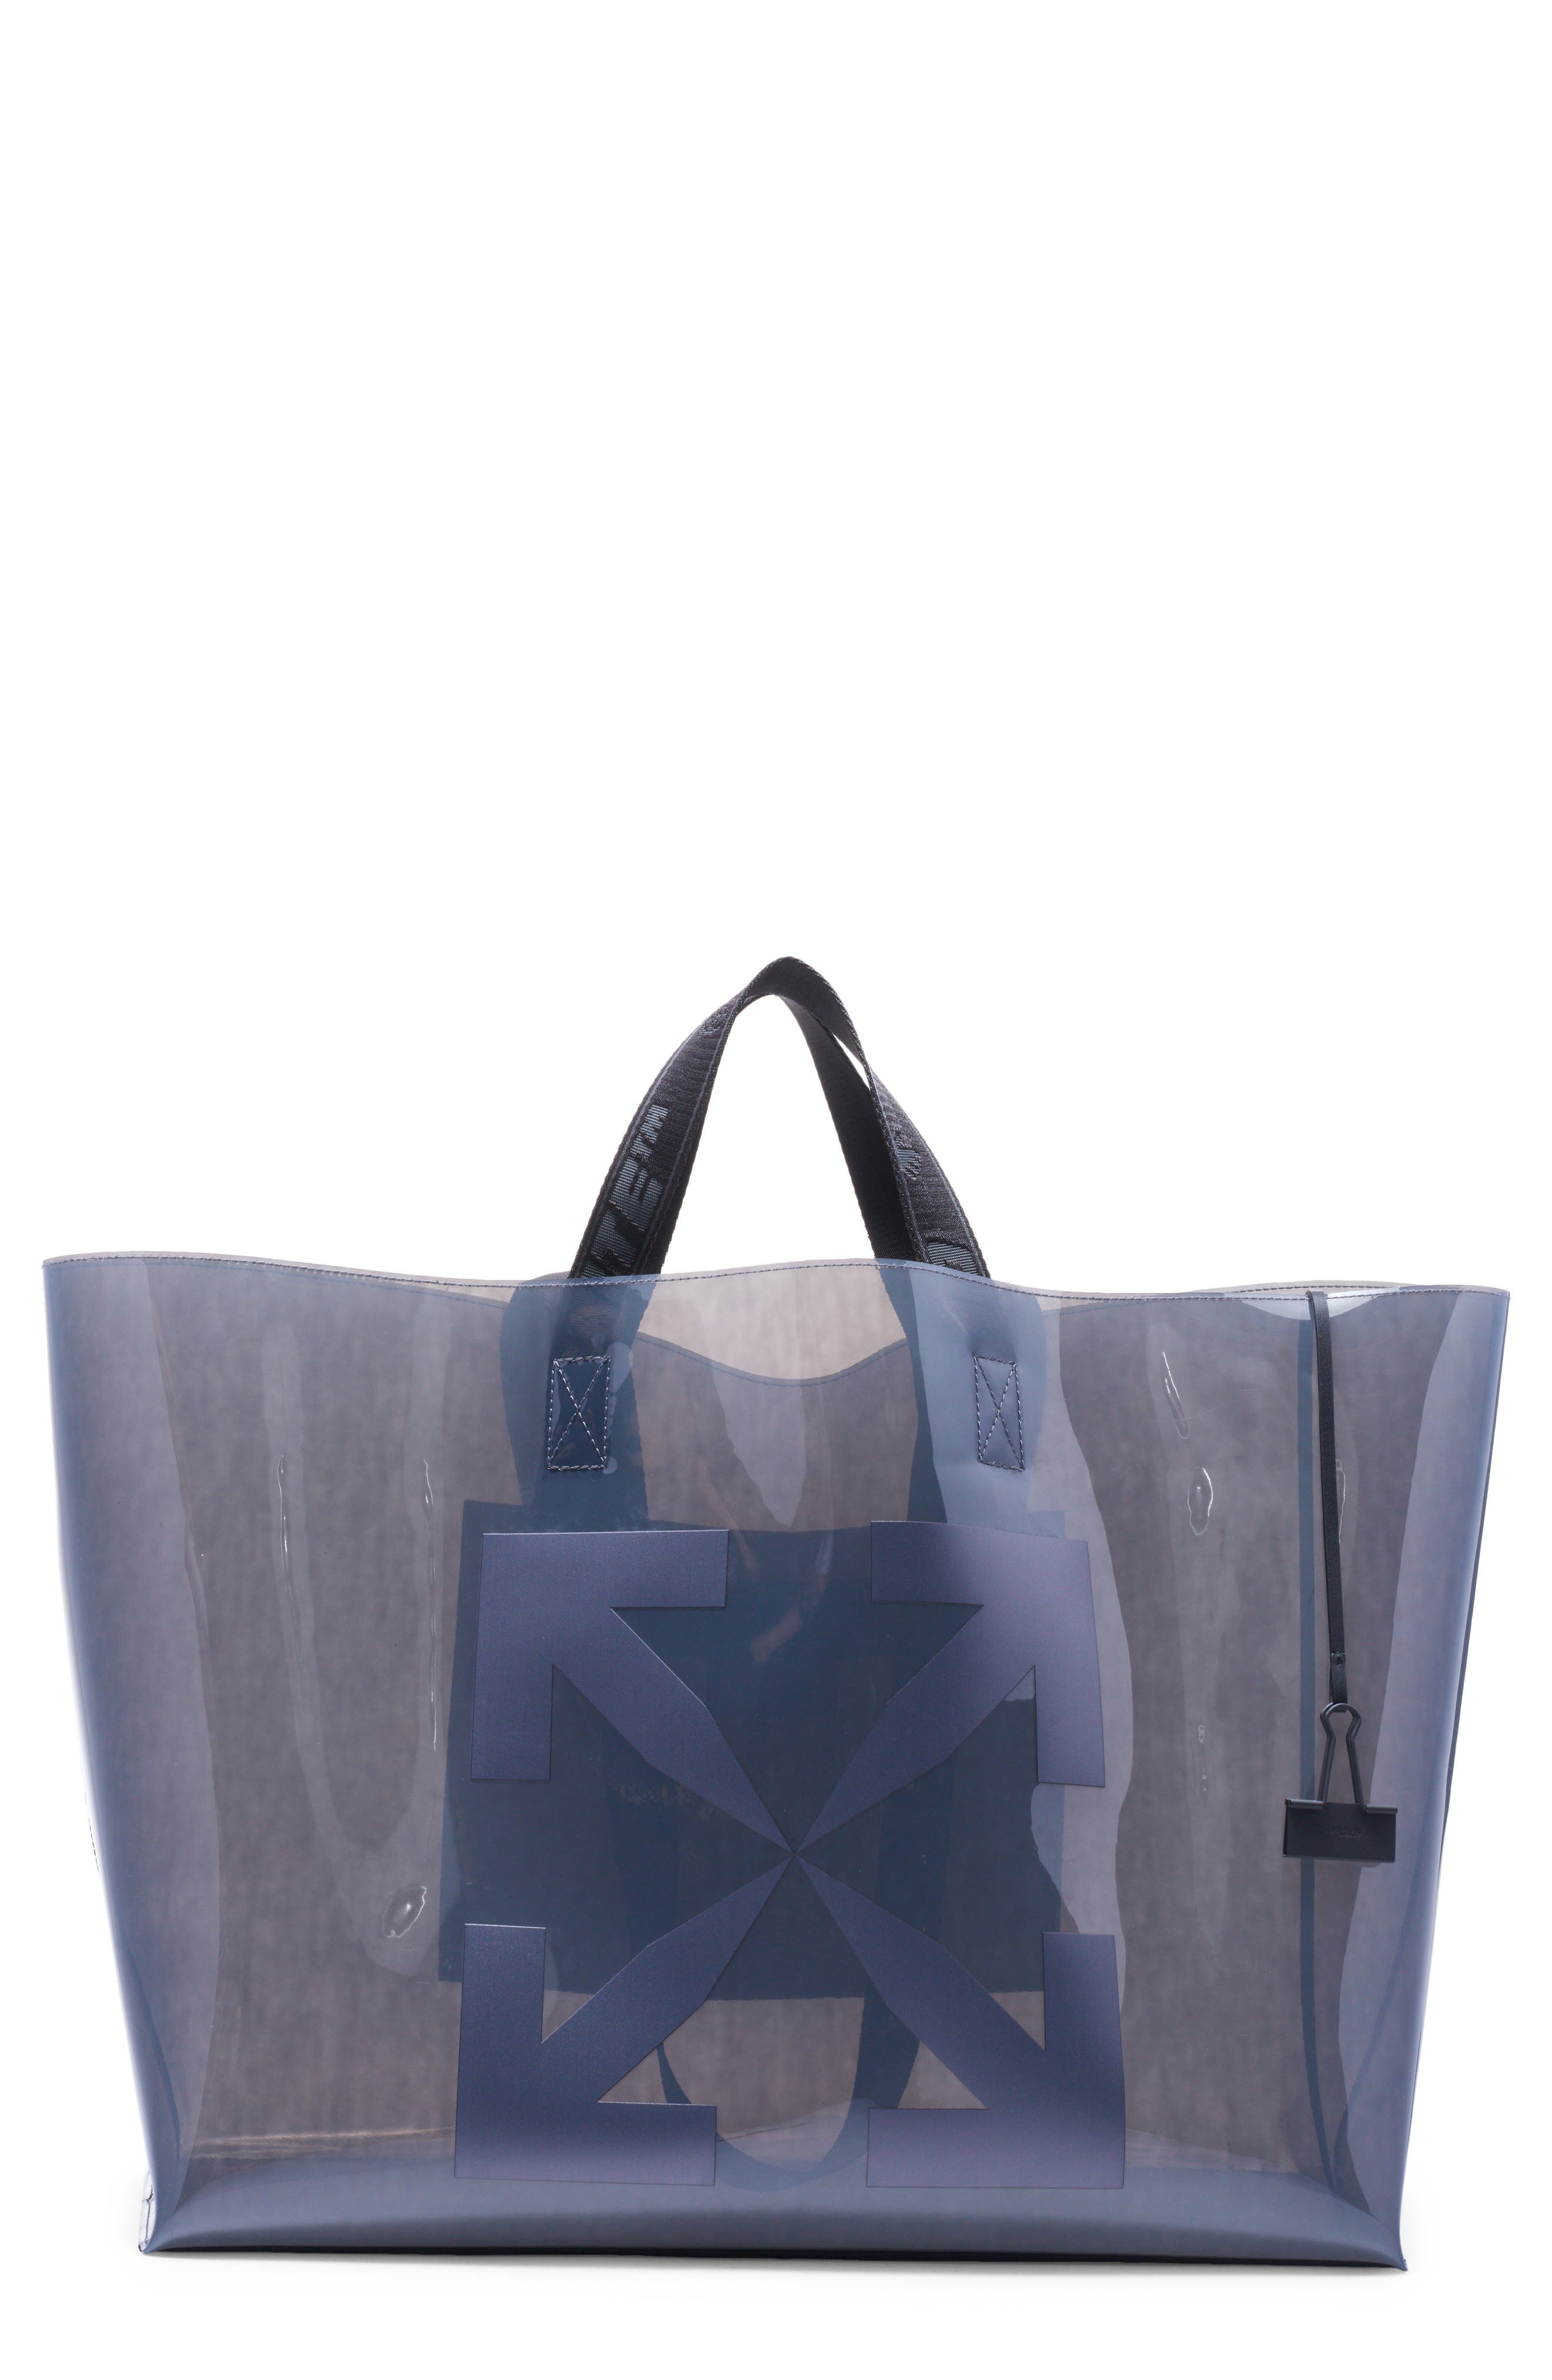 Off-White Arrow Clear Tote in Grey Grey at Nordstrom